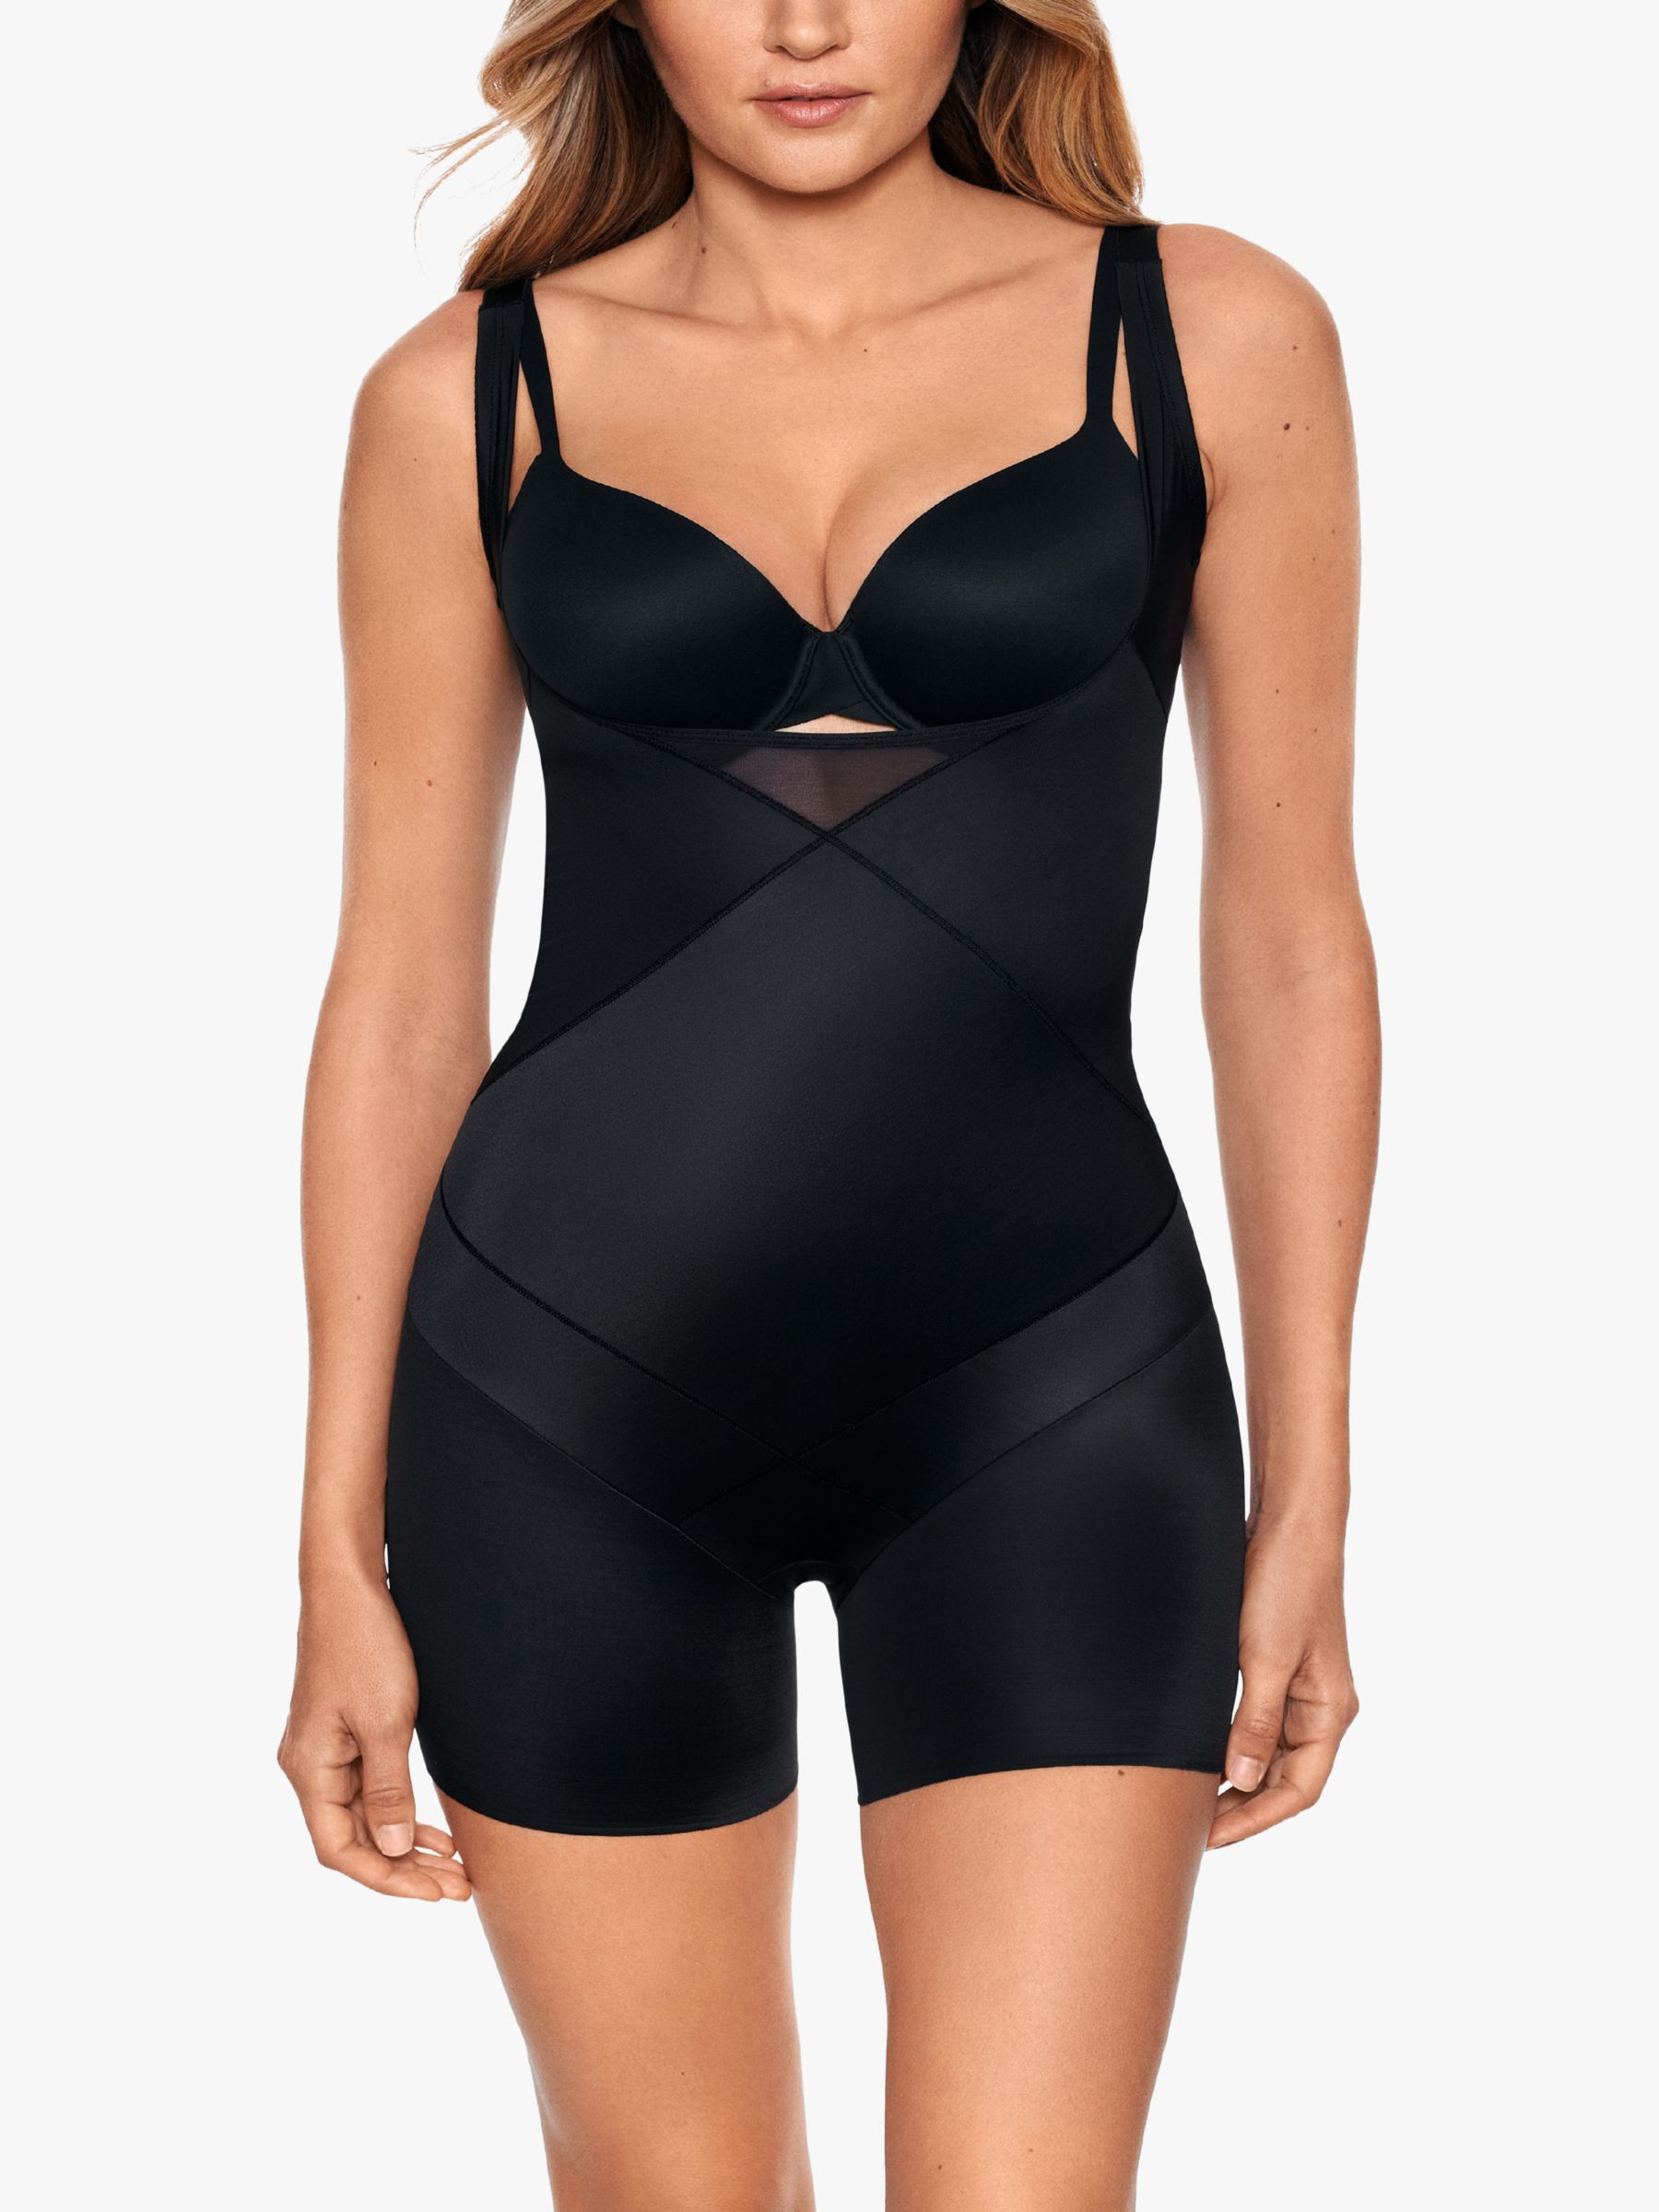 FIRM CONTROL BODY SUIT –